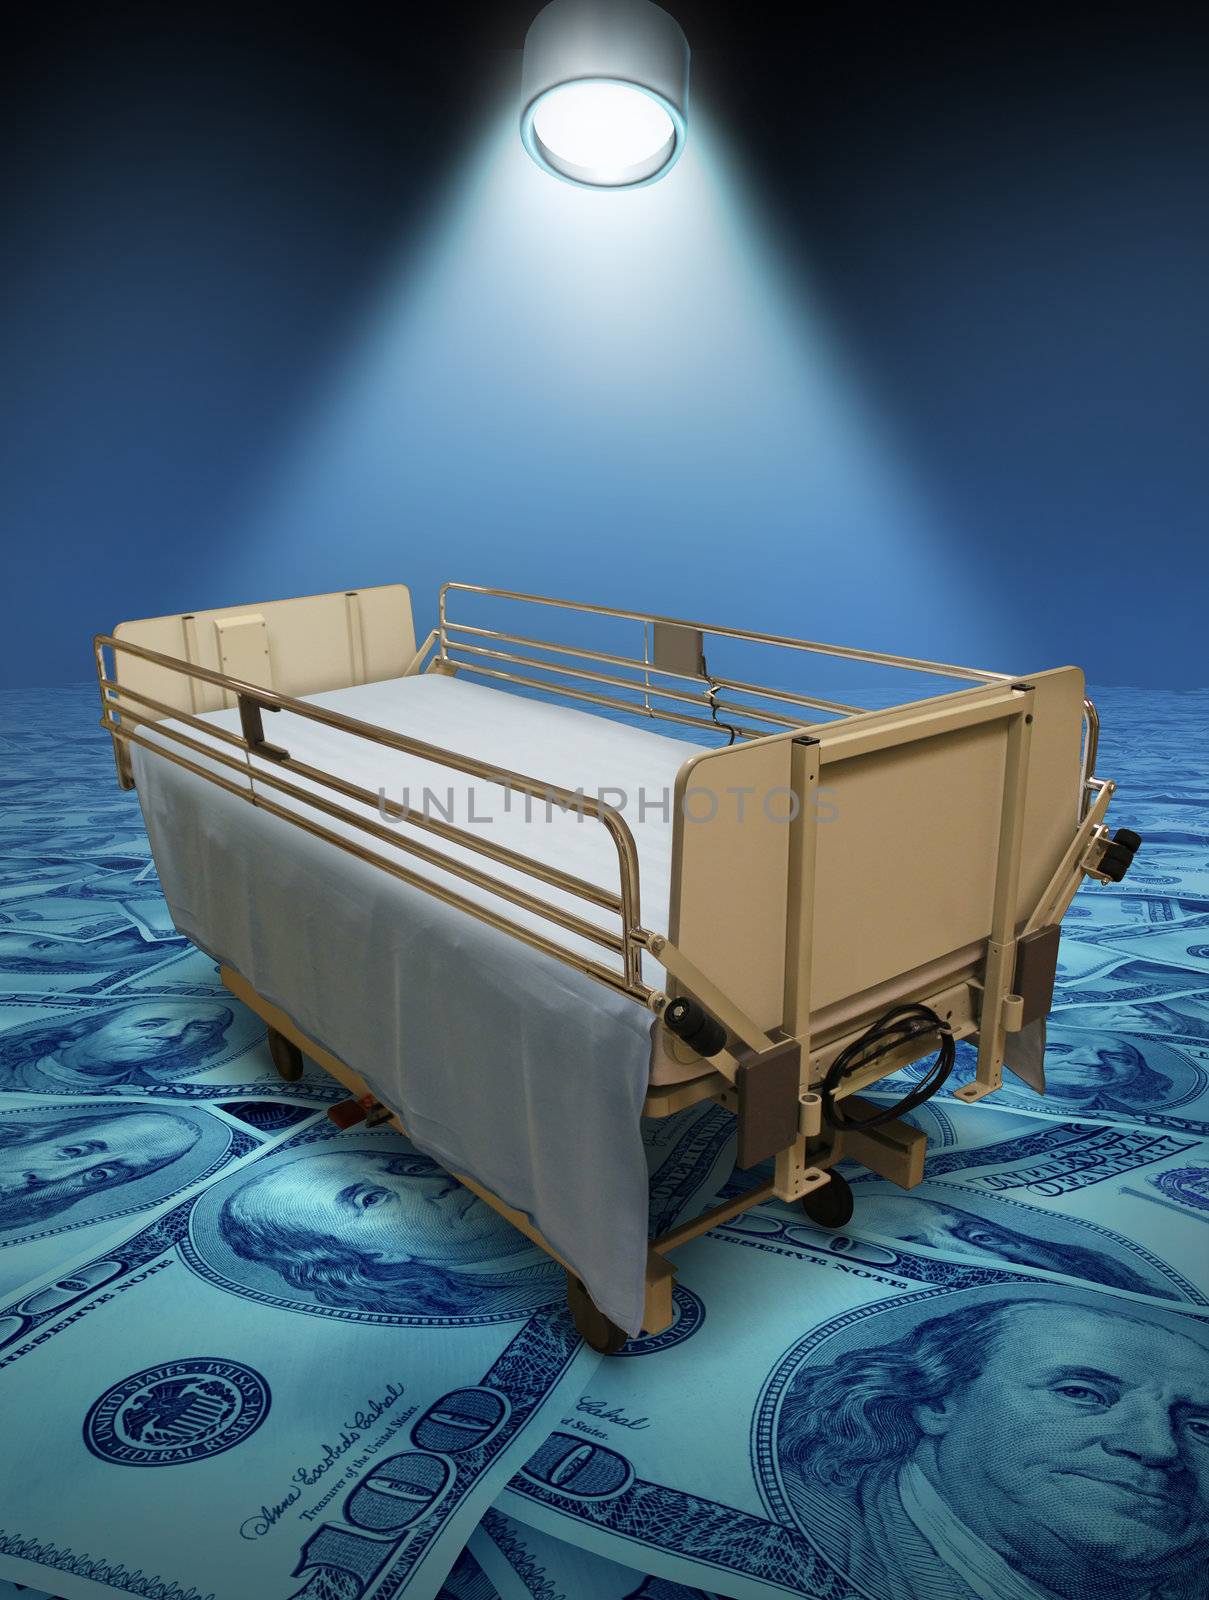 Hospital care expenses and the high costs of medical inurance for surgery or medicine treatment represented by a stretcher on a blue floor of money and a spotlight shining on the bed.